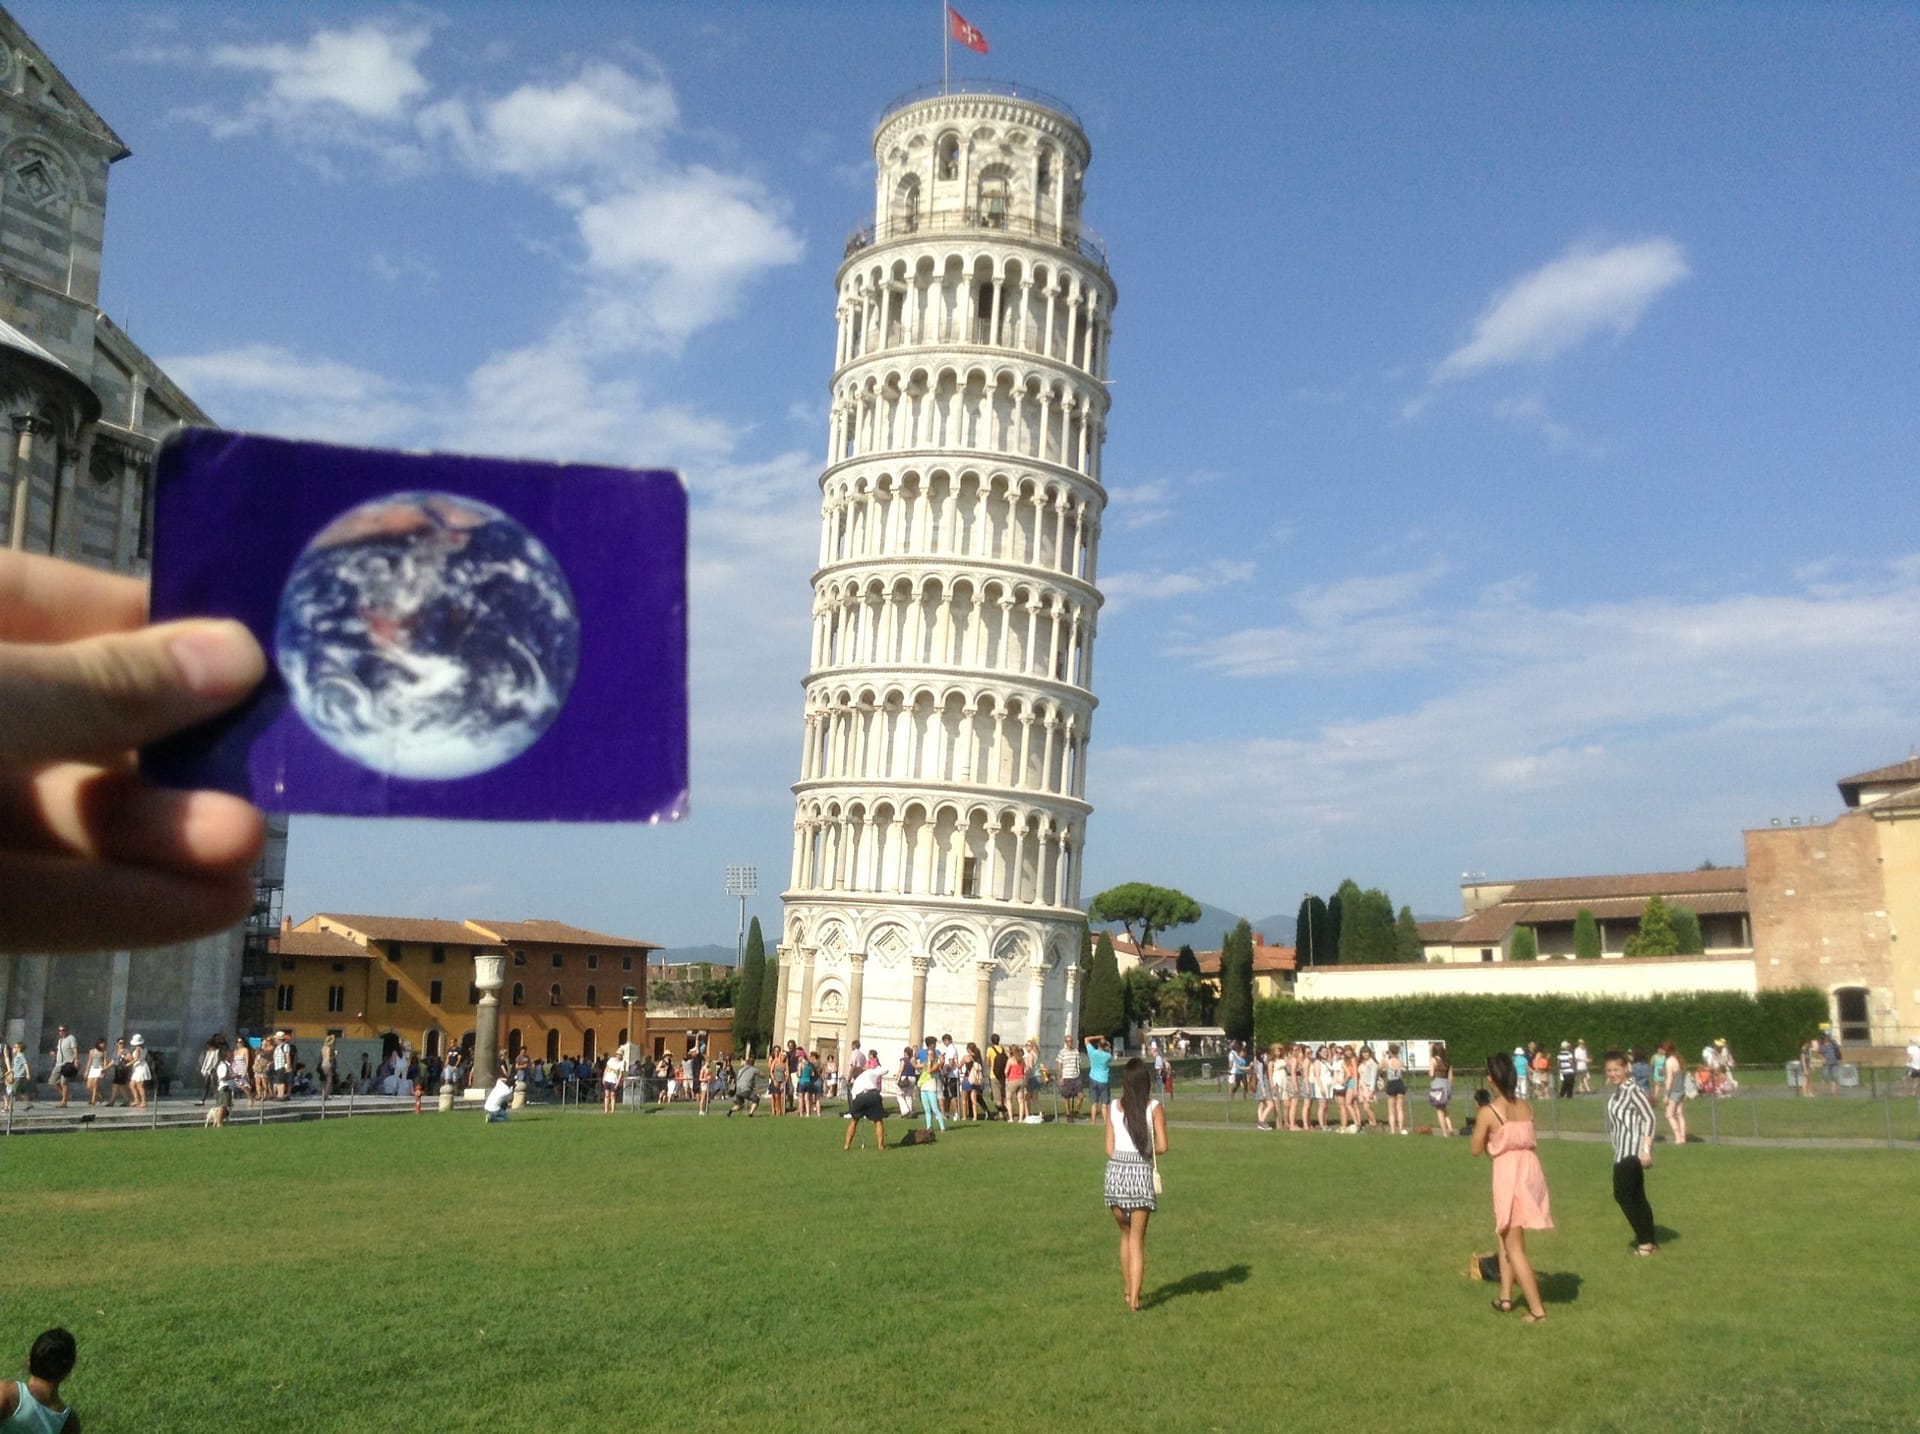 The Leaning Tower of Pisa was #EarthFlagged !